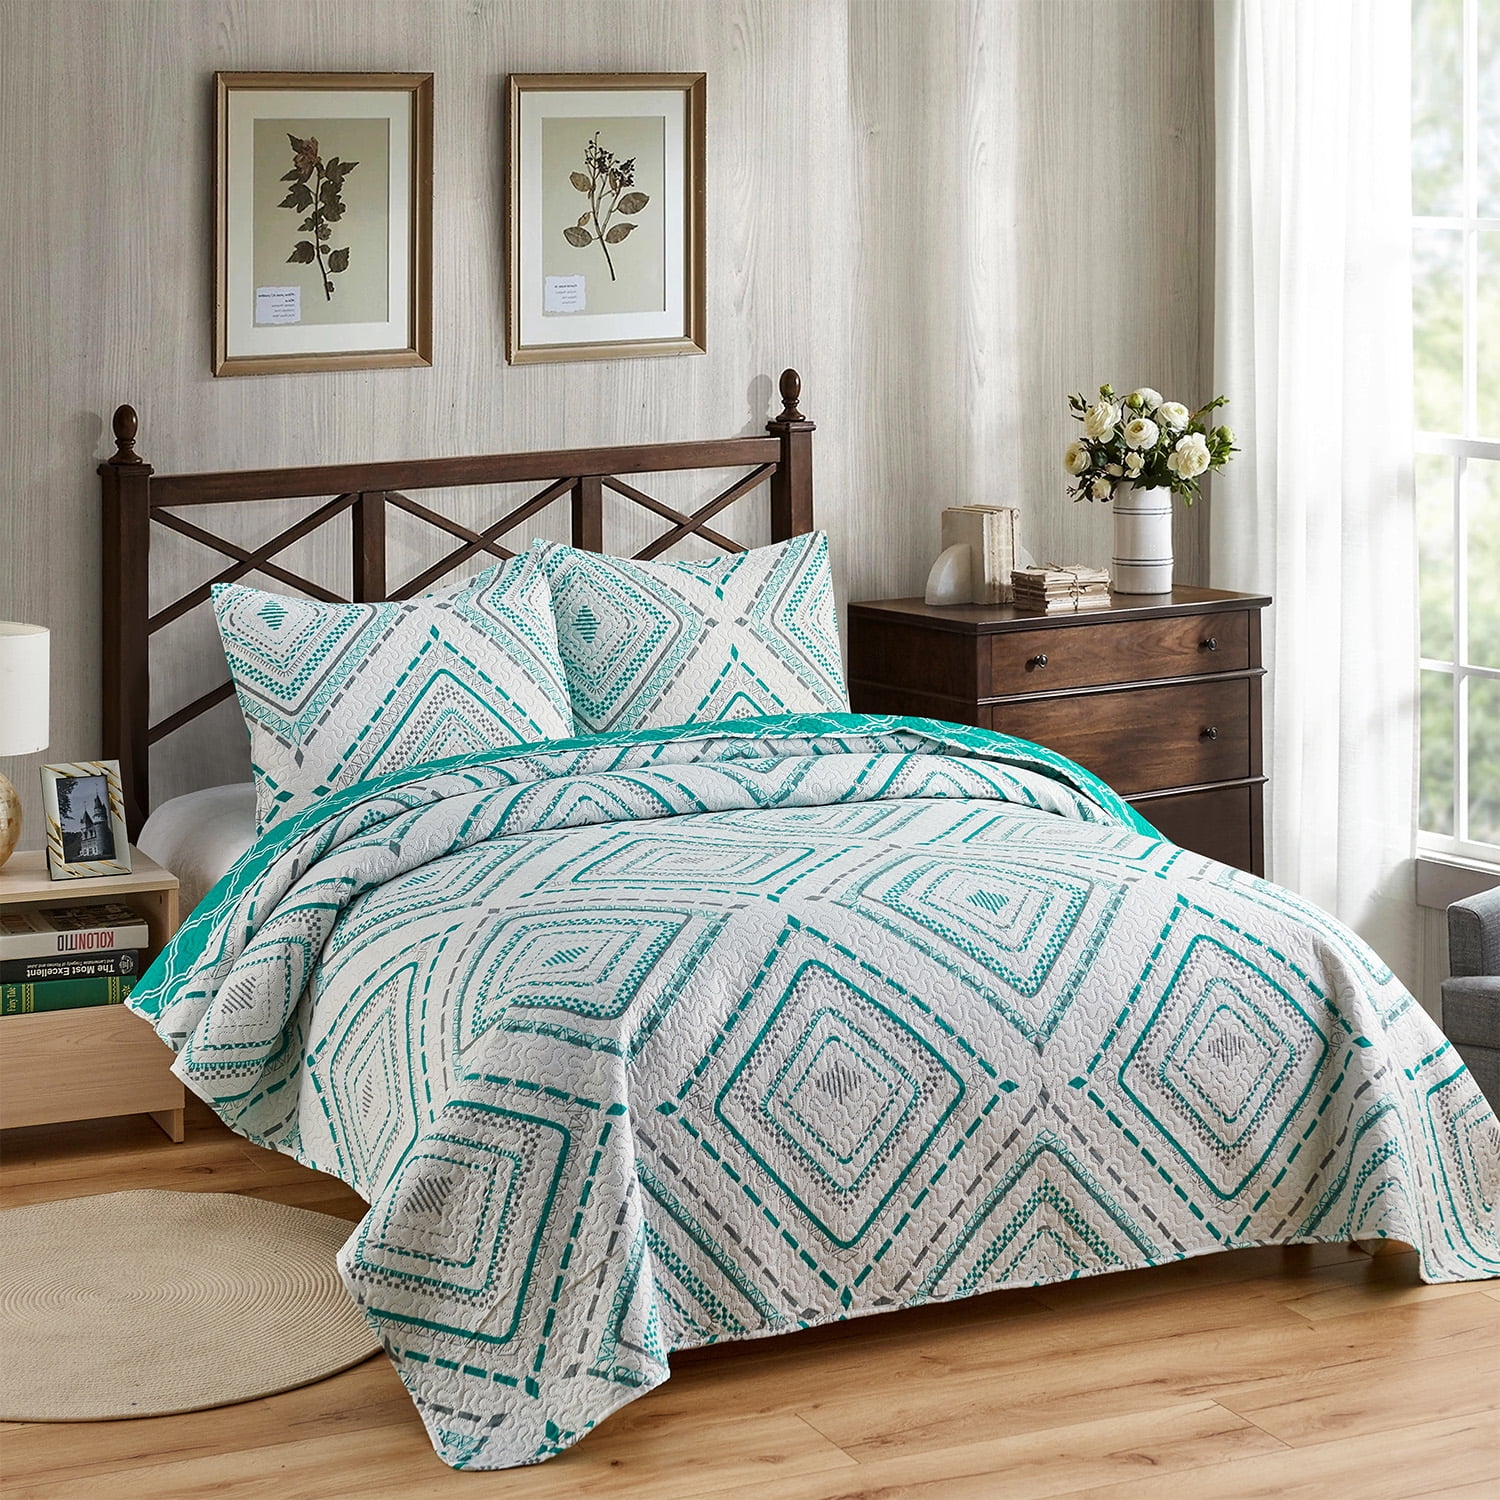 New Diamond Embossed Bedspread Quilted Double King Size Bed Throw & Pillowcases 